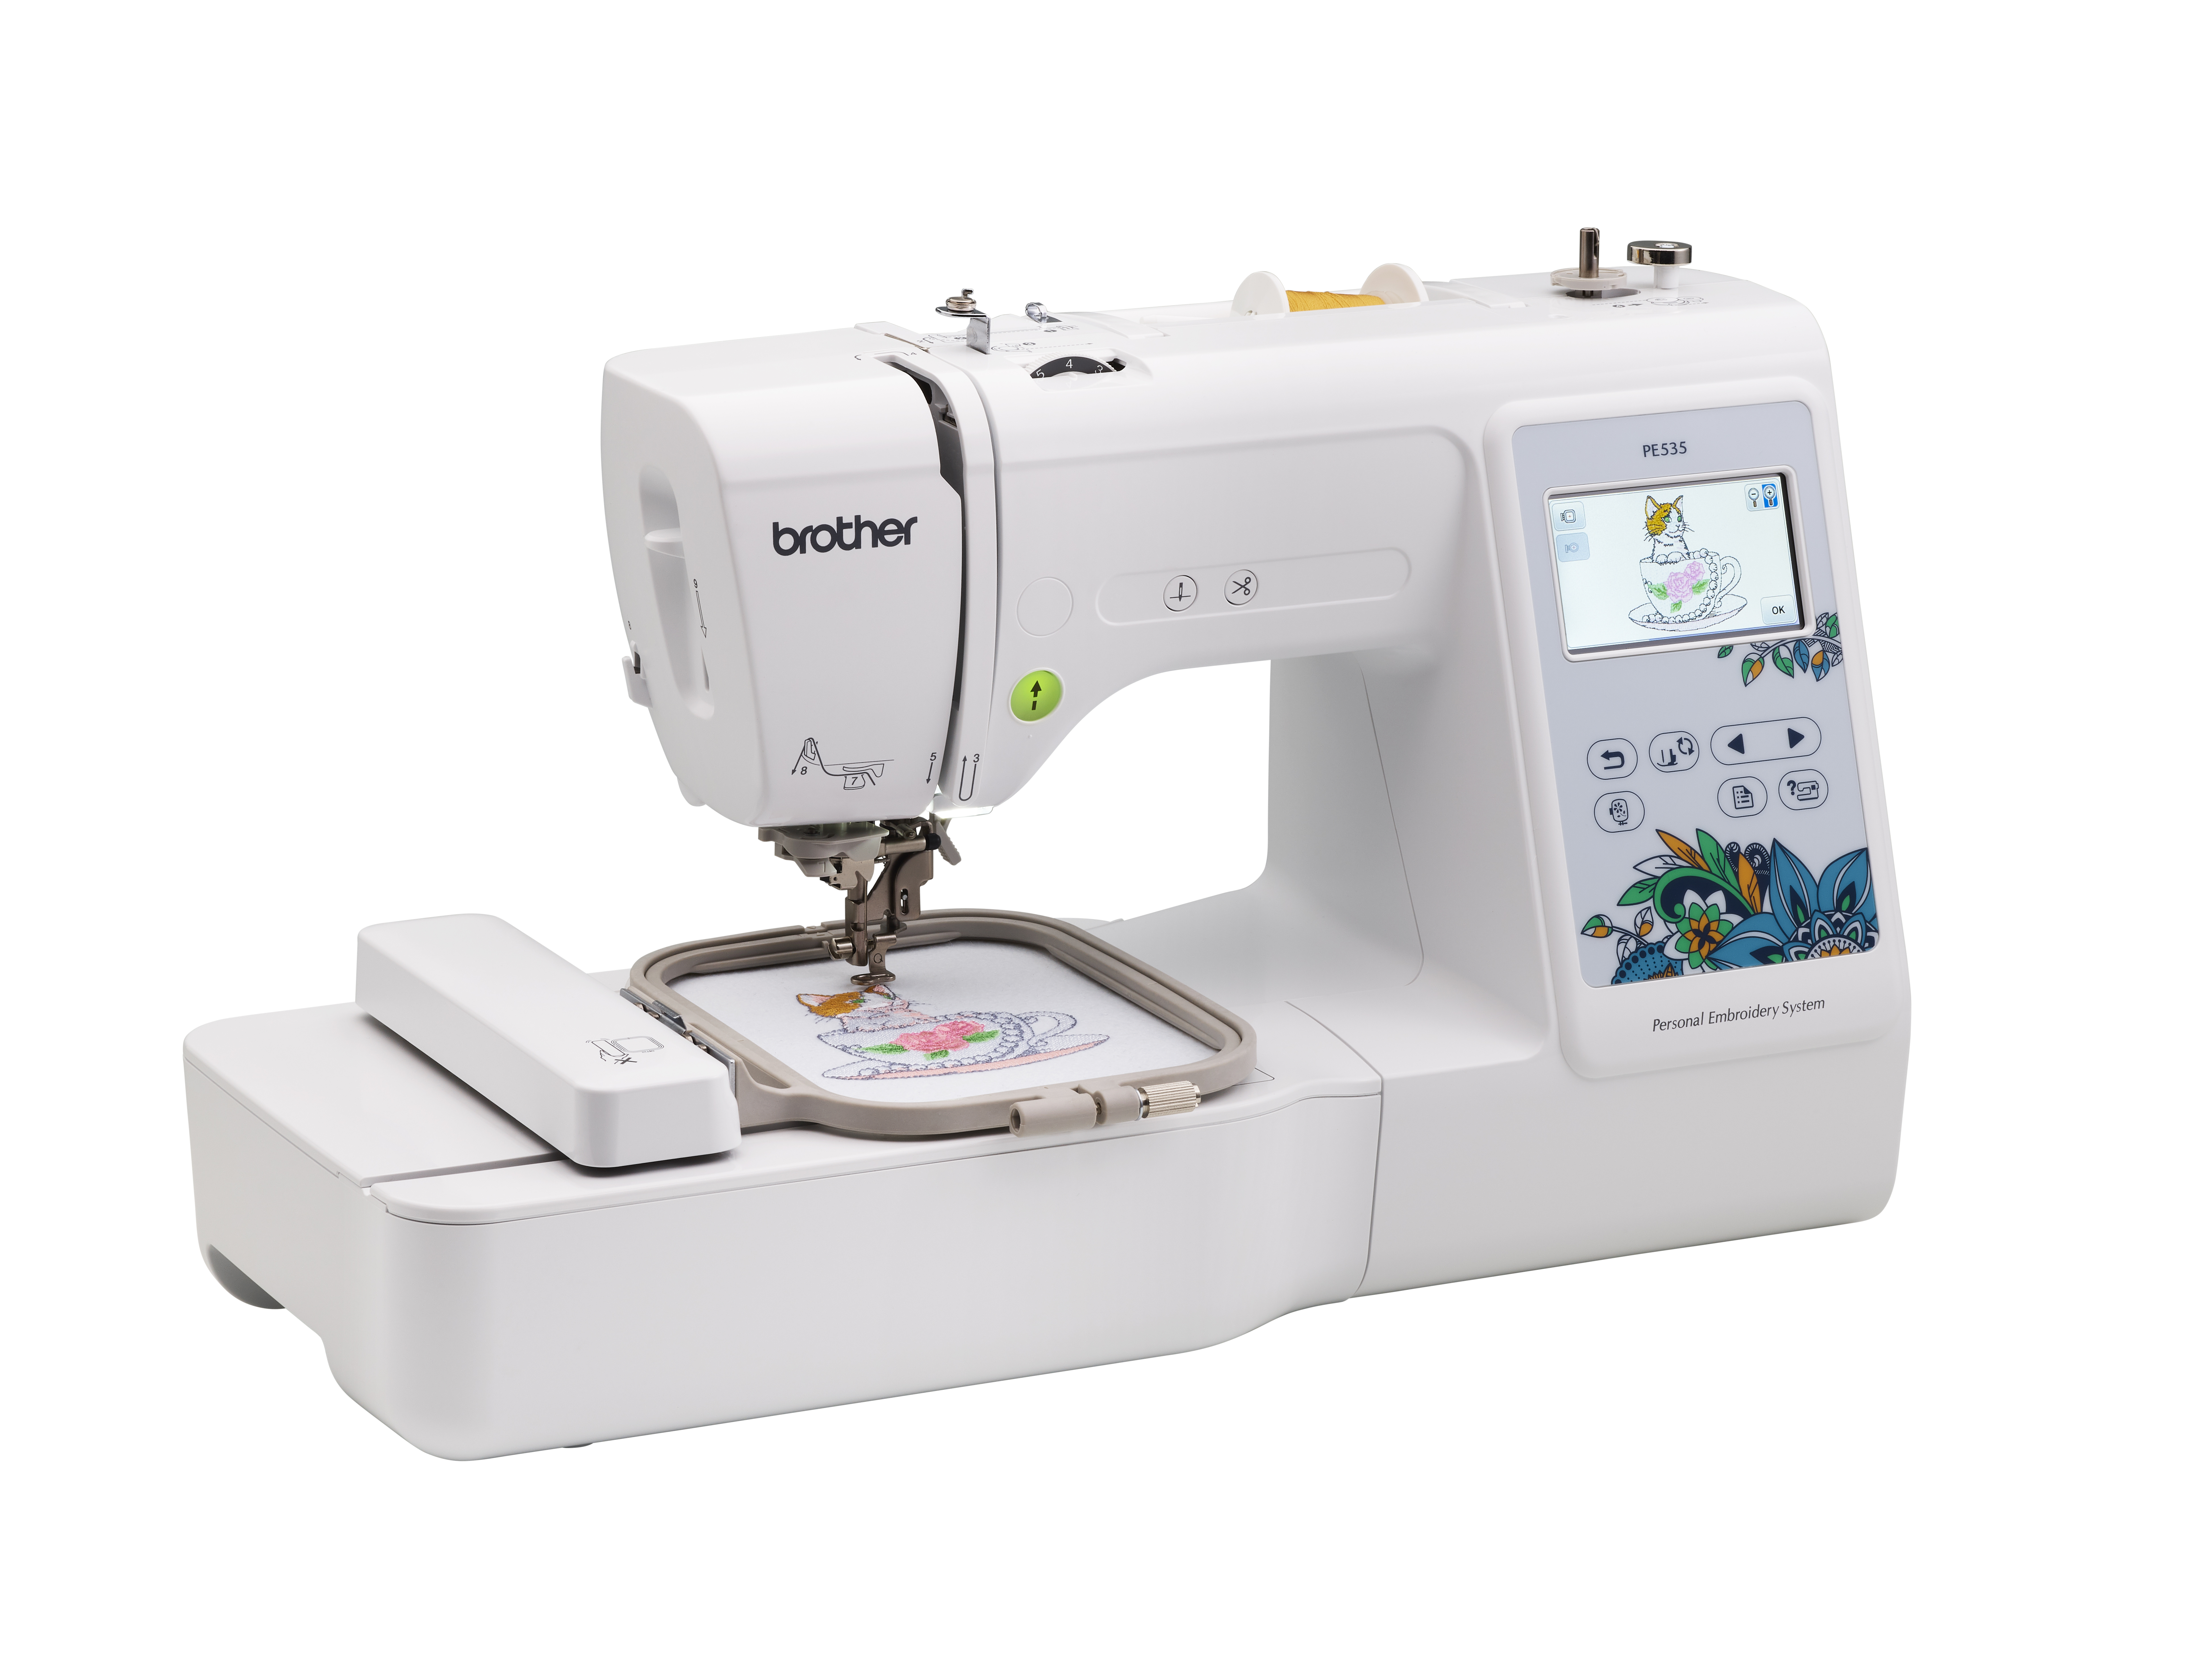 Brother Embroidery Machine Patterns Brother Pe535 Embroidery Machine Wit 4x4 Embroidery Area 80 Built In Designs 32 Lcd Color Touchscreen Display